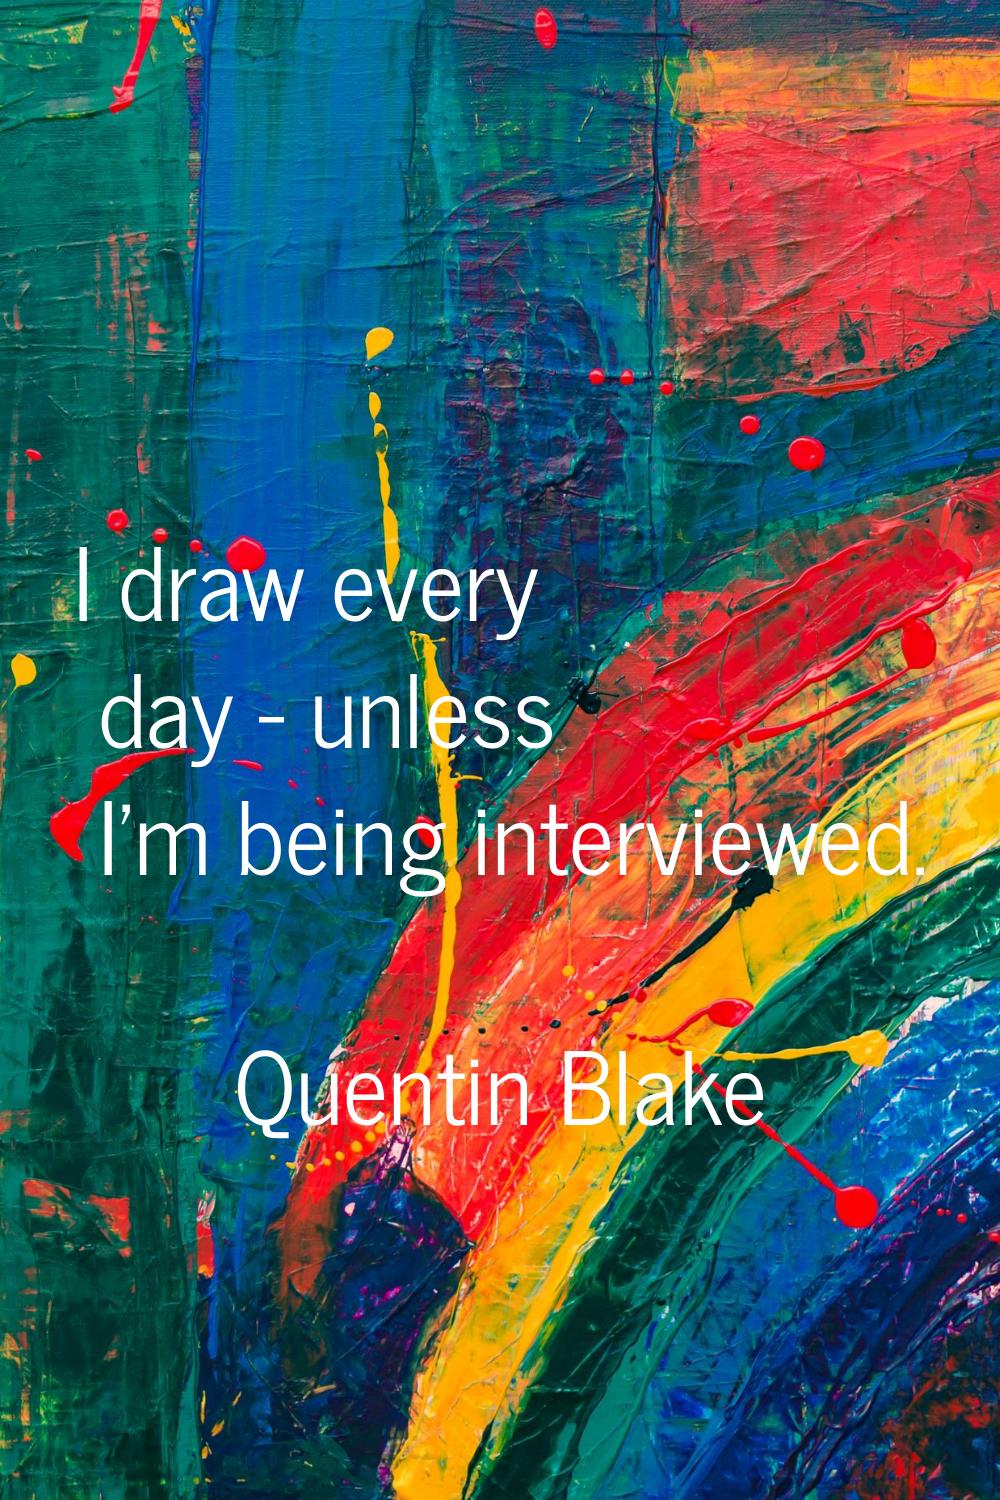 I draw every day - unless I'm being interviewed.